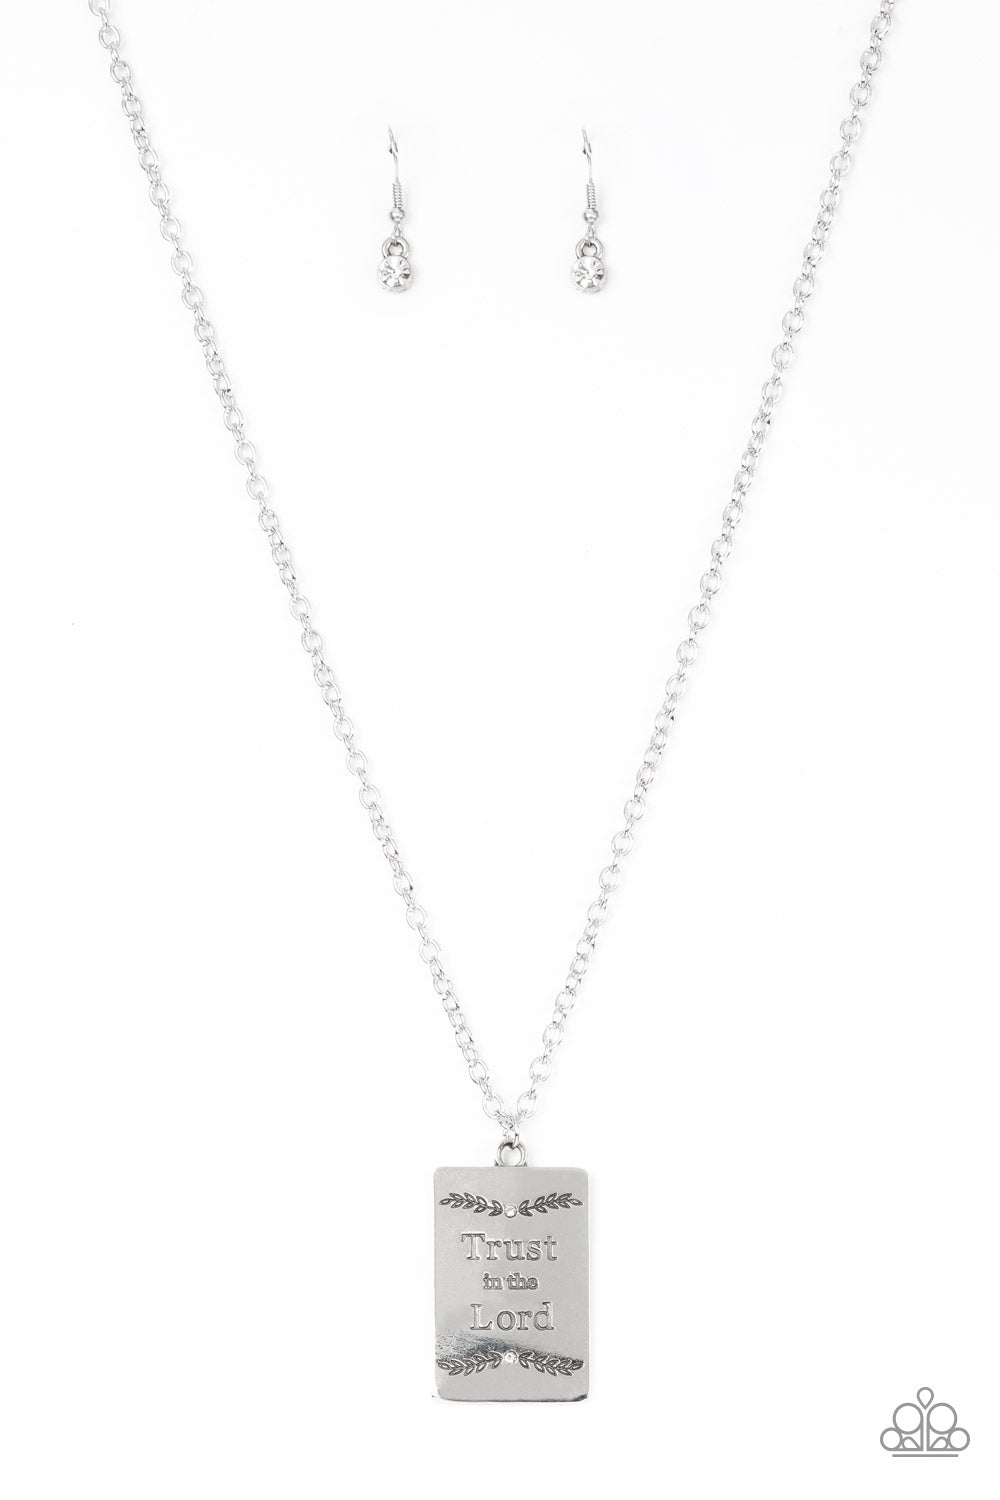 Paparazzi Accessories - All About Trust - White Necklace Inspirational